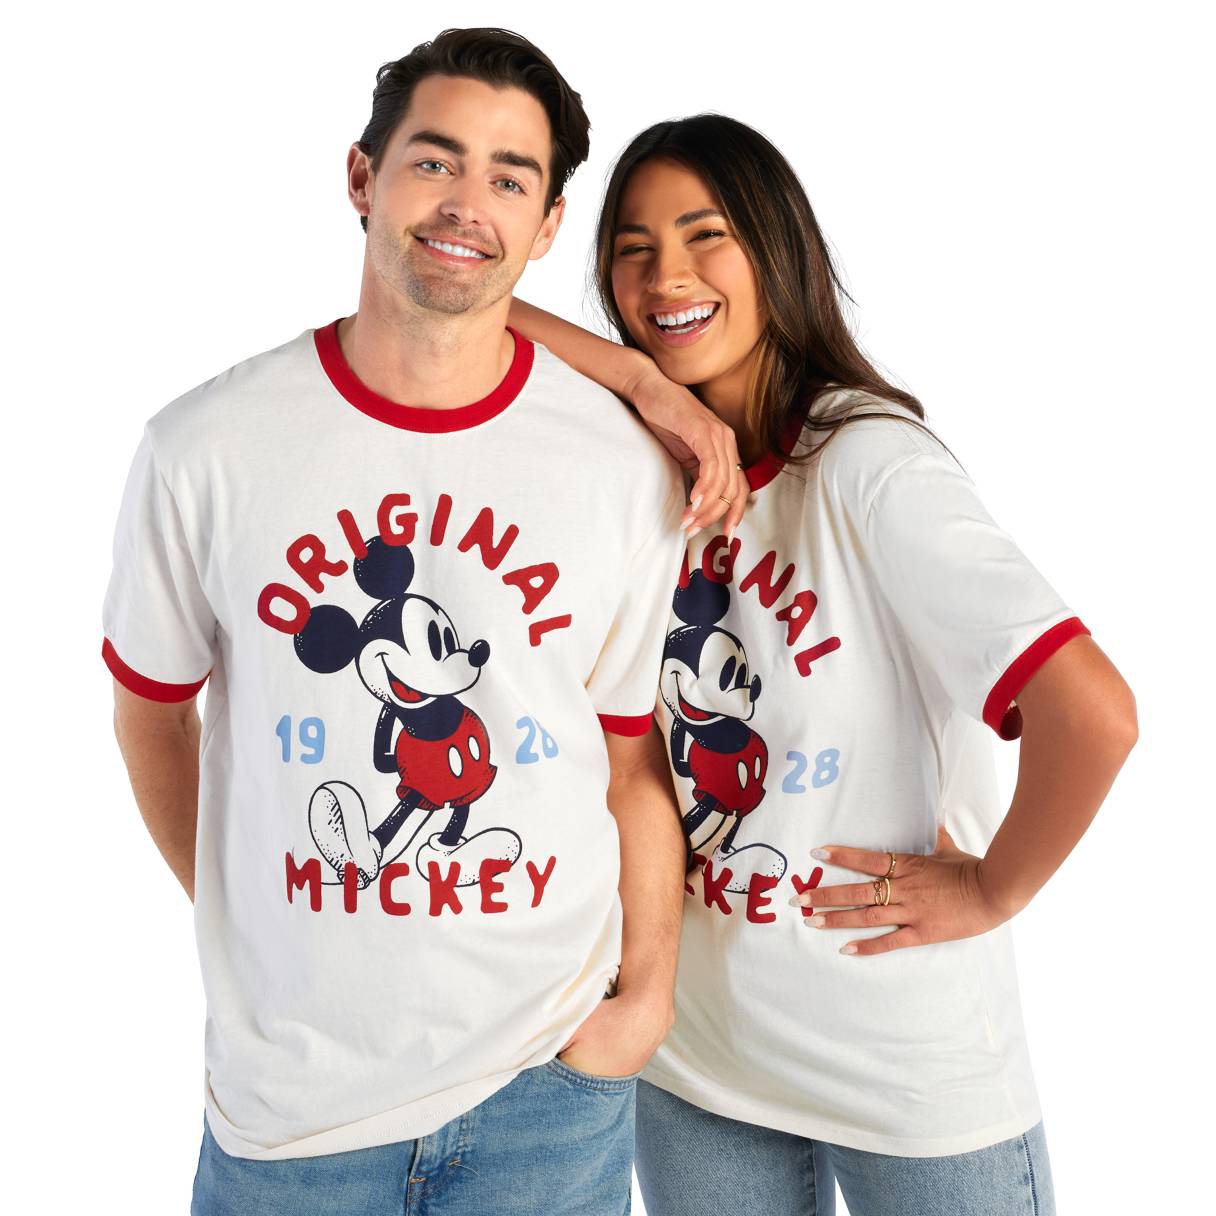 shopDisney Fall Into Fresh Savings: Up to 40% off + Free Shipping